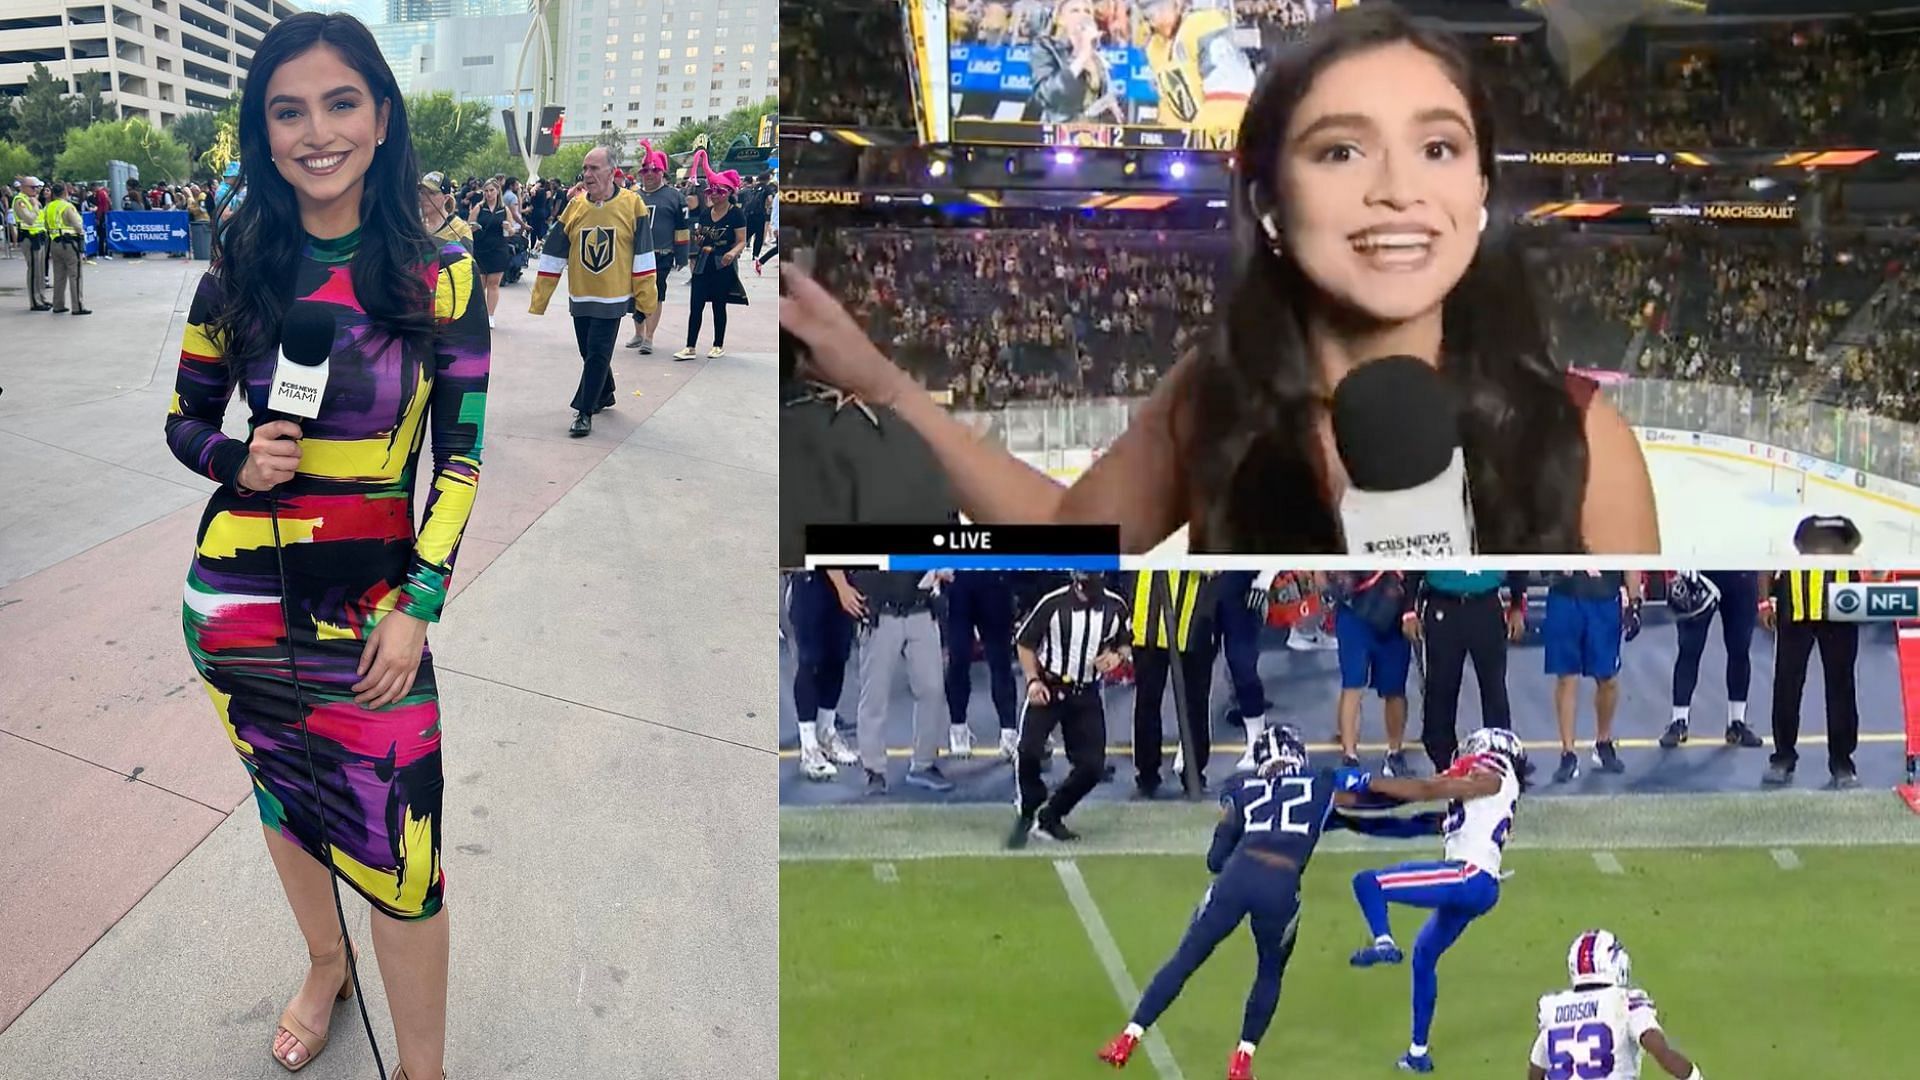 Samantha Rivera was doing her best Derrick Henry impression while covering the Stanley Cup finals